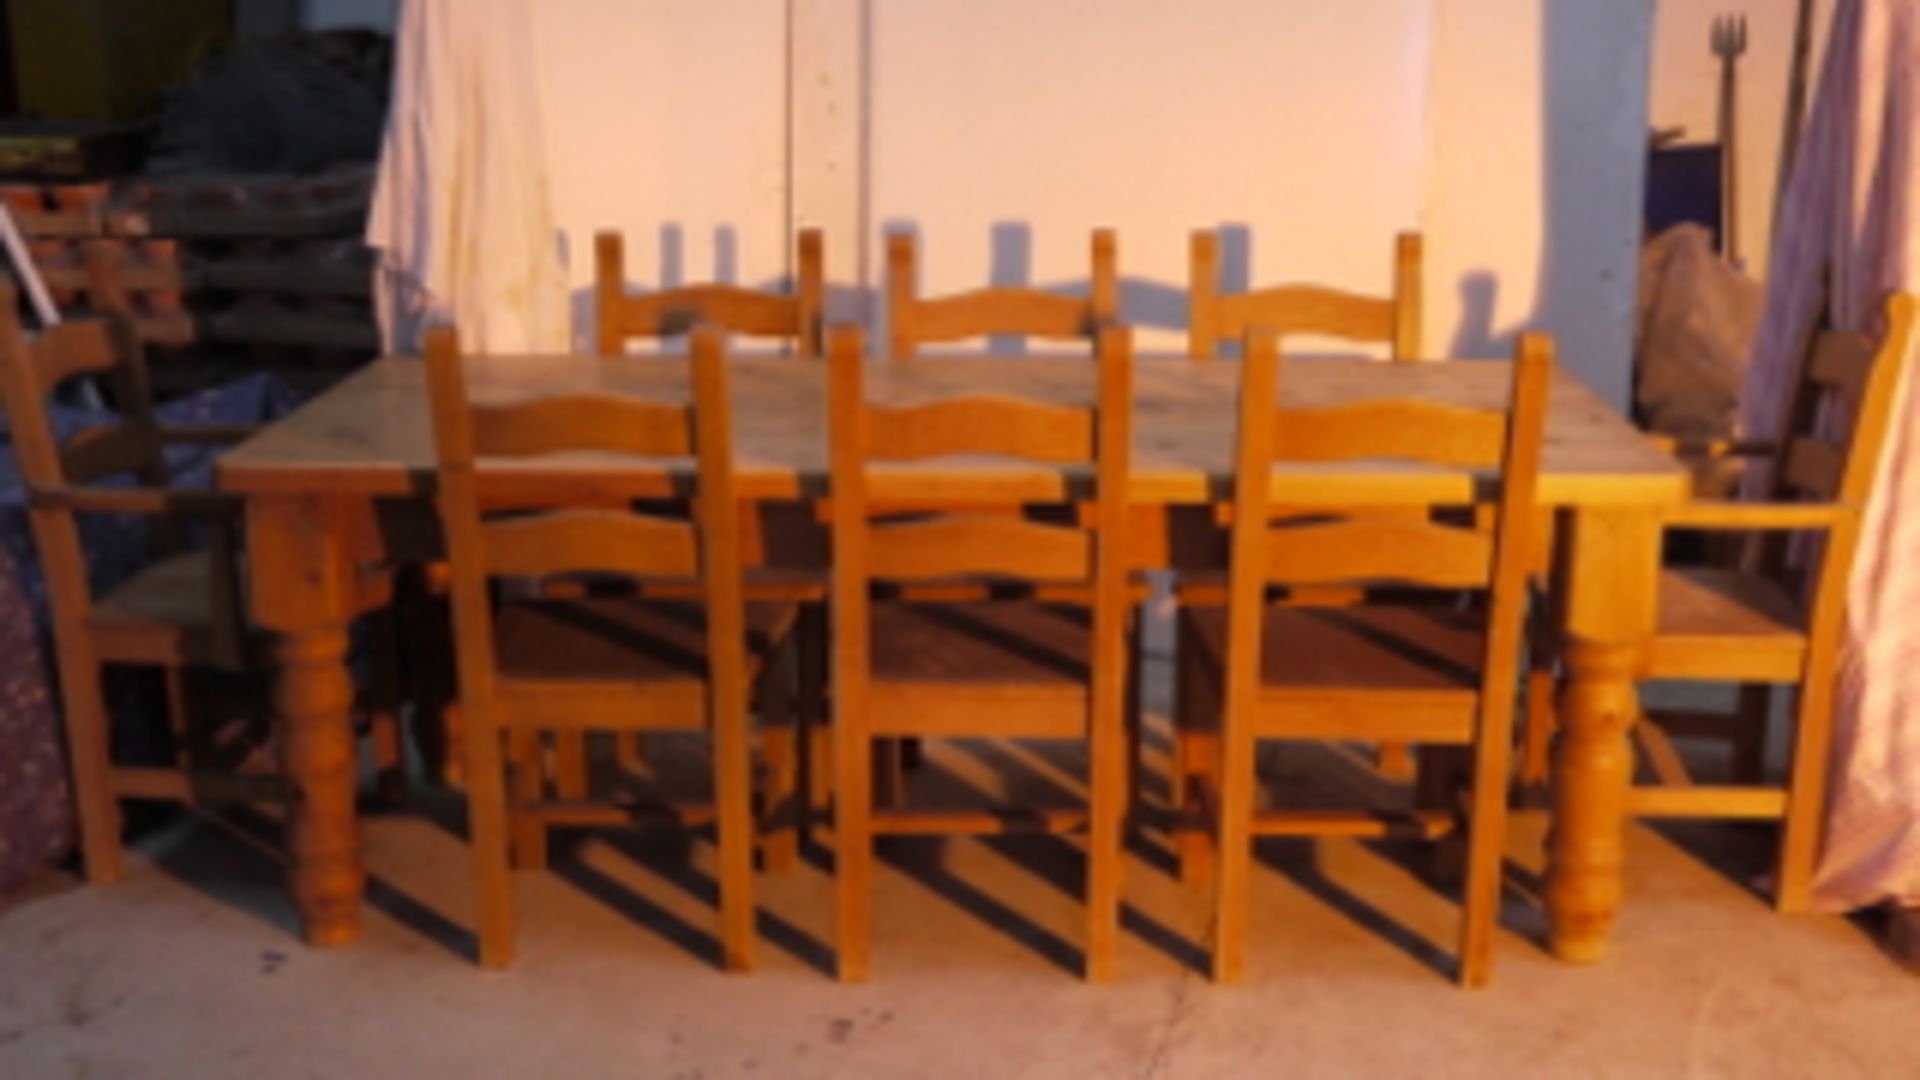 Farm house Table and chairs -  214 wide x 78 high x 91 deep - Image 3 of 3